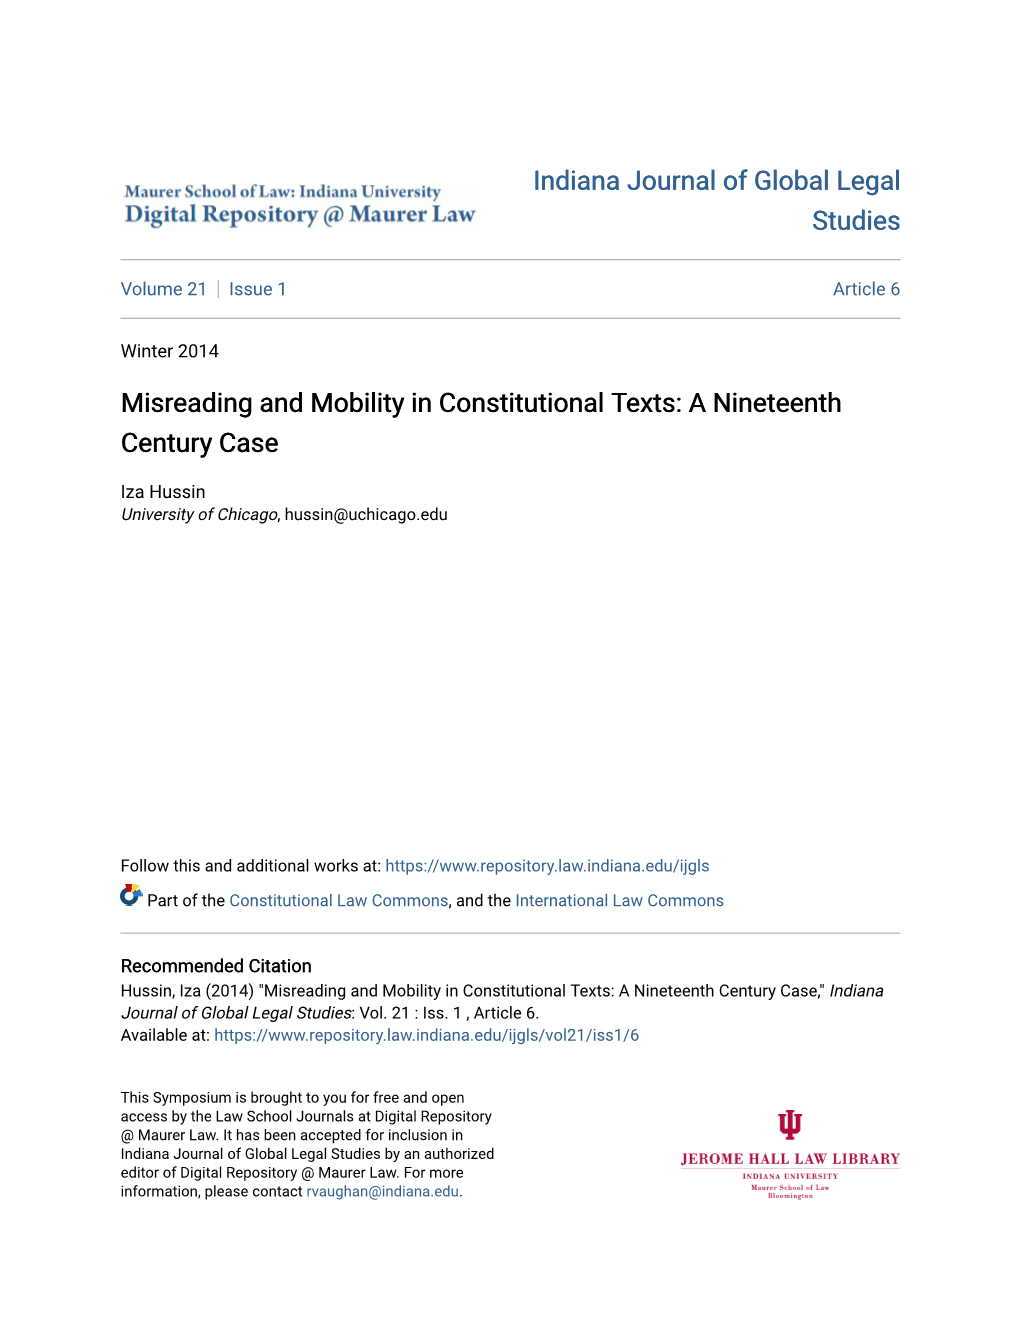 Misreading and Mobility in Constitutional Texts: a Nineteenth Century Case